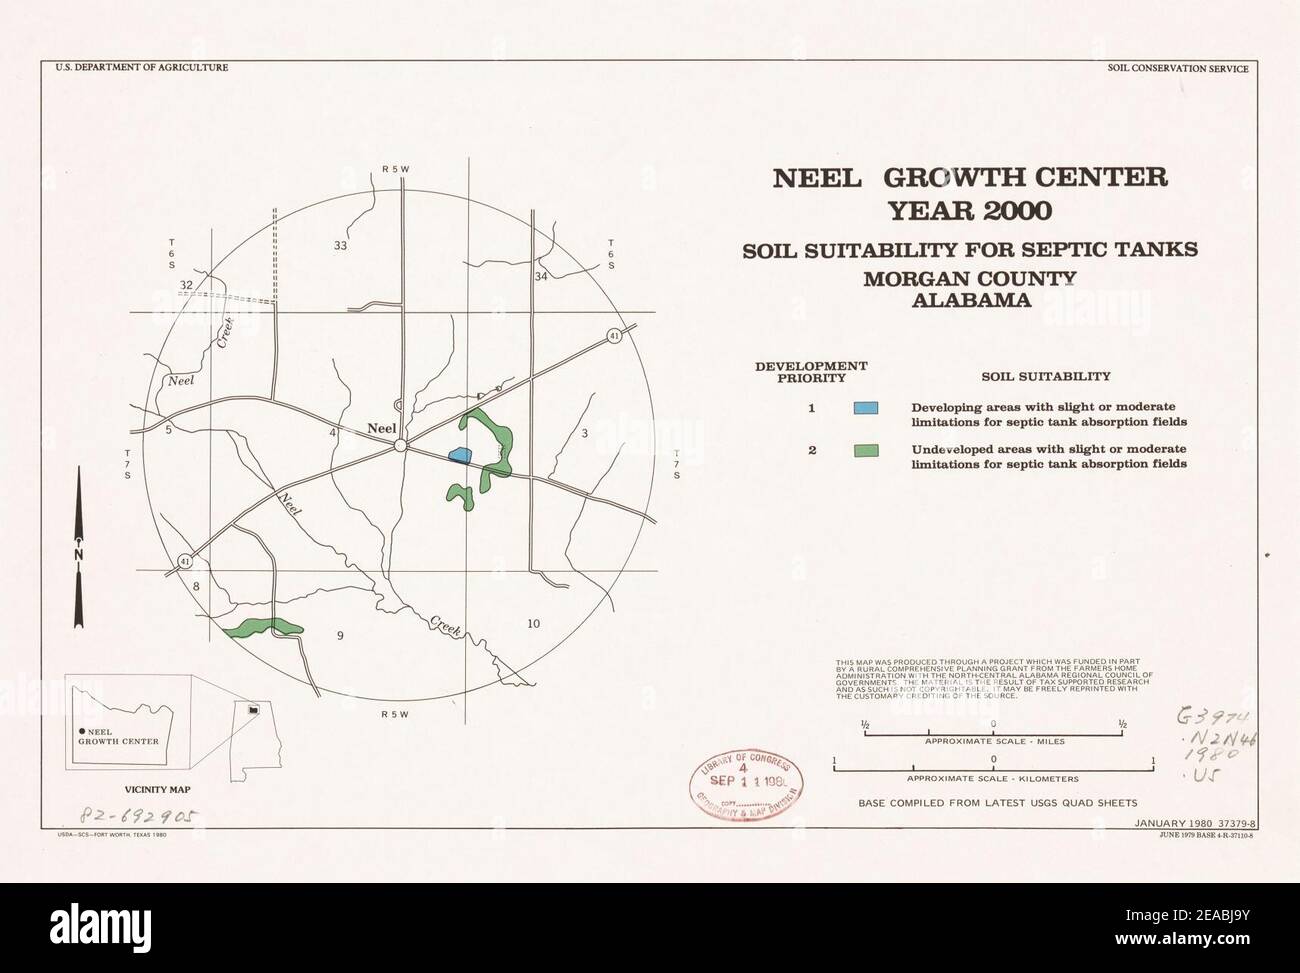 Neel Growth Center year 2000, soil suitability for septic tanks, Morgan County, Alabama Stock Photo